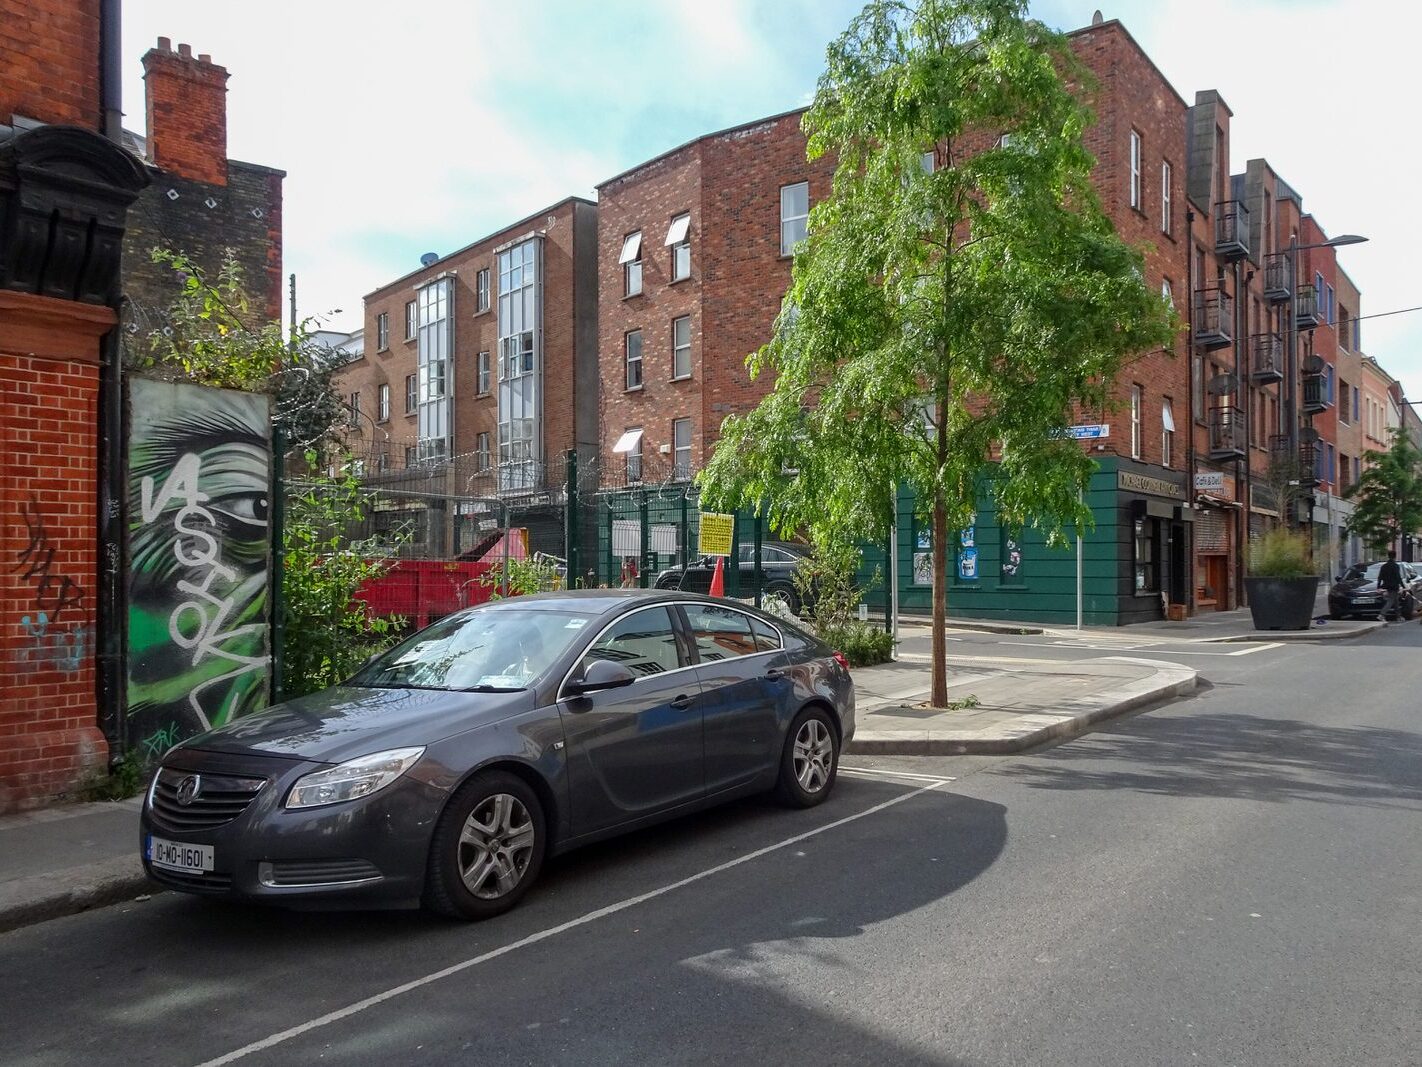 THE FRANCIS STREET UPGRADE HAS BEEN A HUGE A SUCCESS [MEATH STREET IS NEXT FOR AN UPGRADE]-236797-1